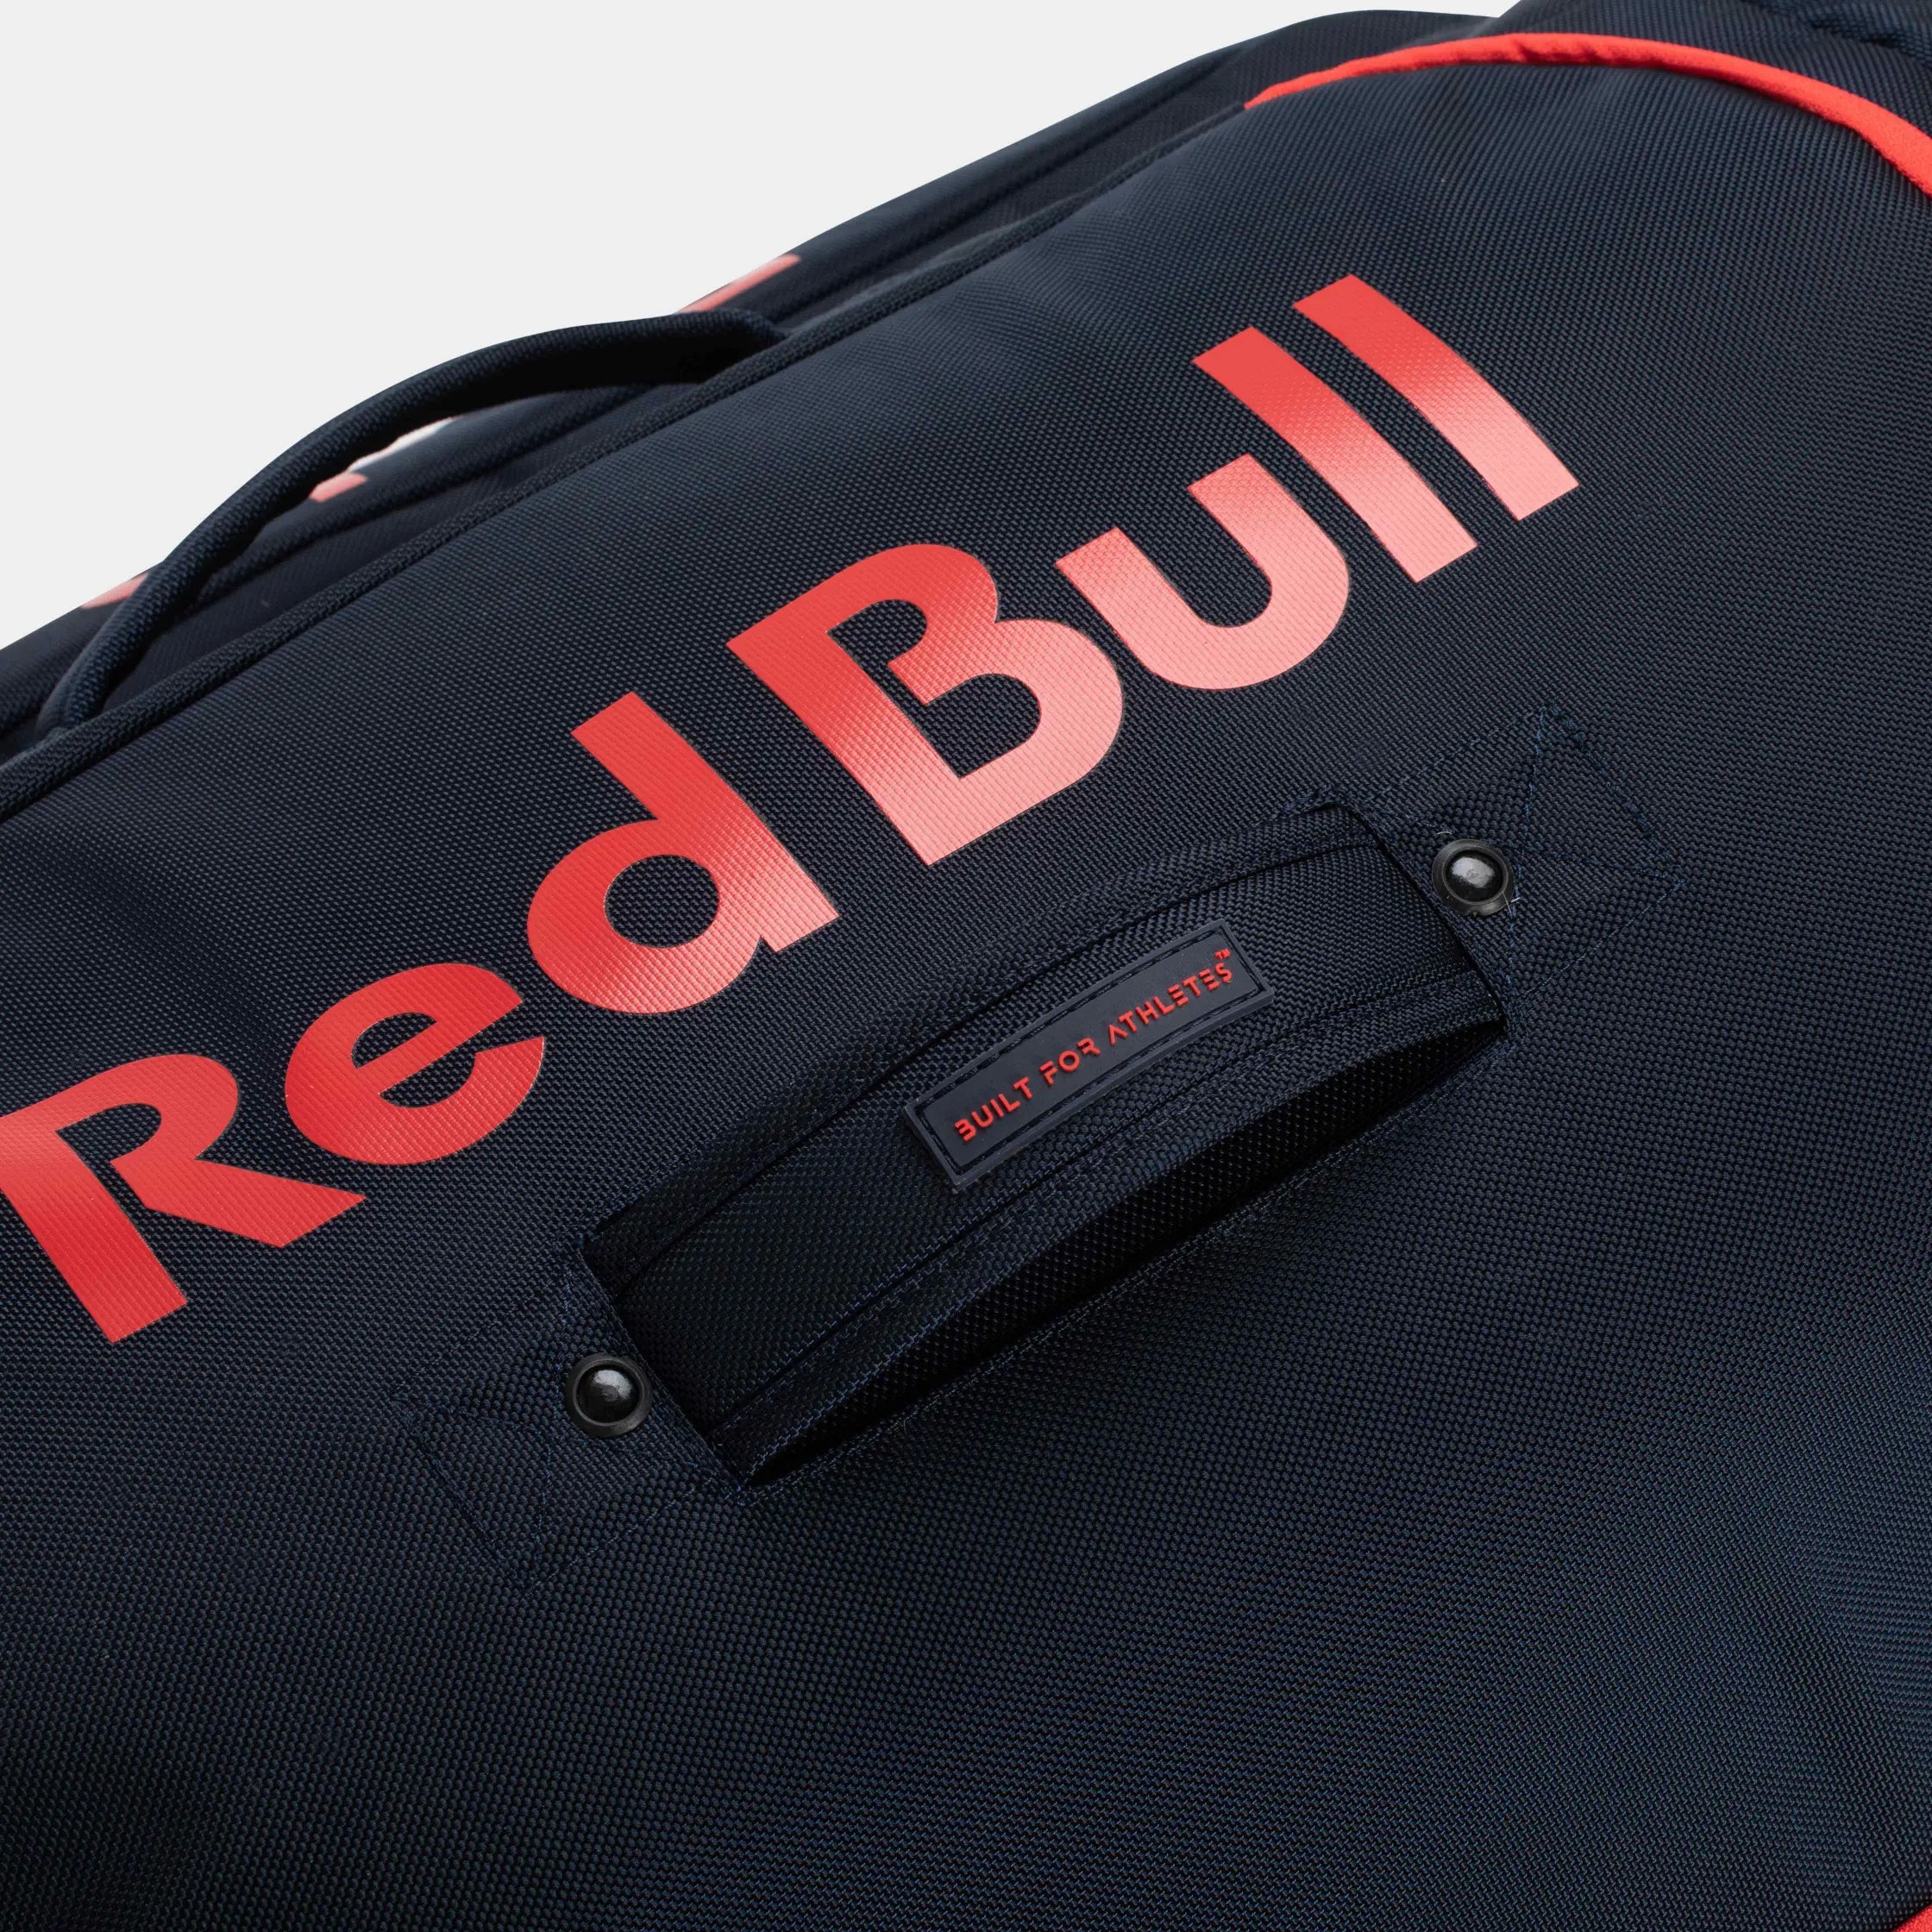 Built For Athletes Backpacks Oracle Red Bull Racing 90L Luggage